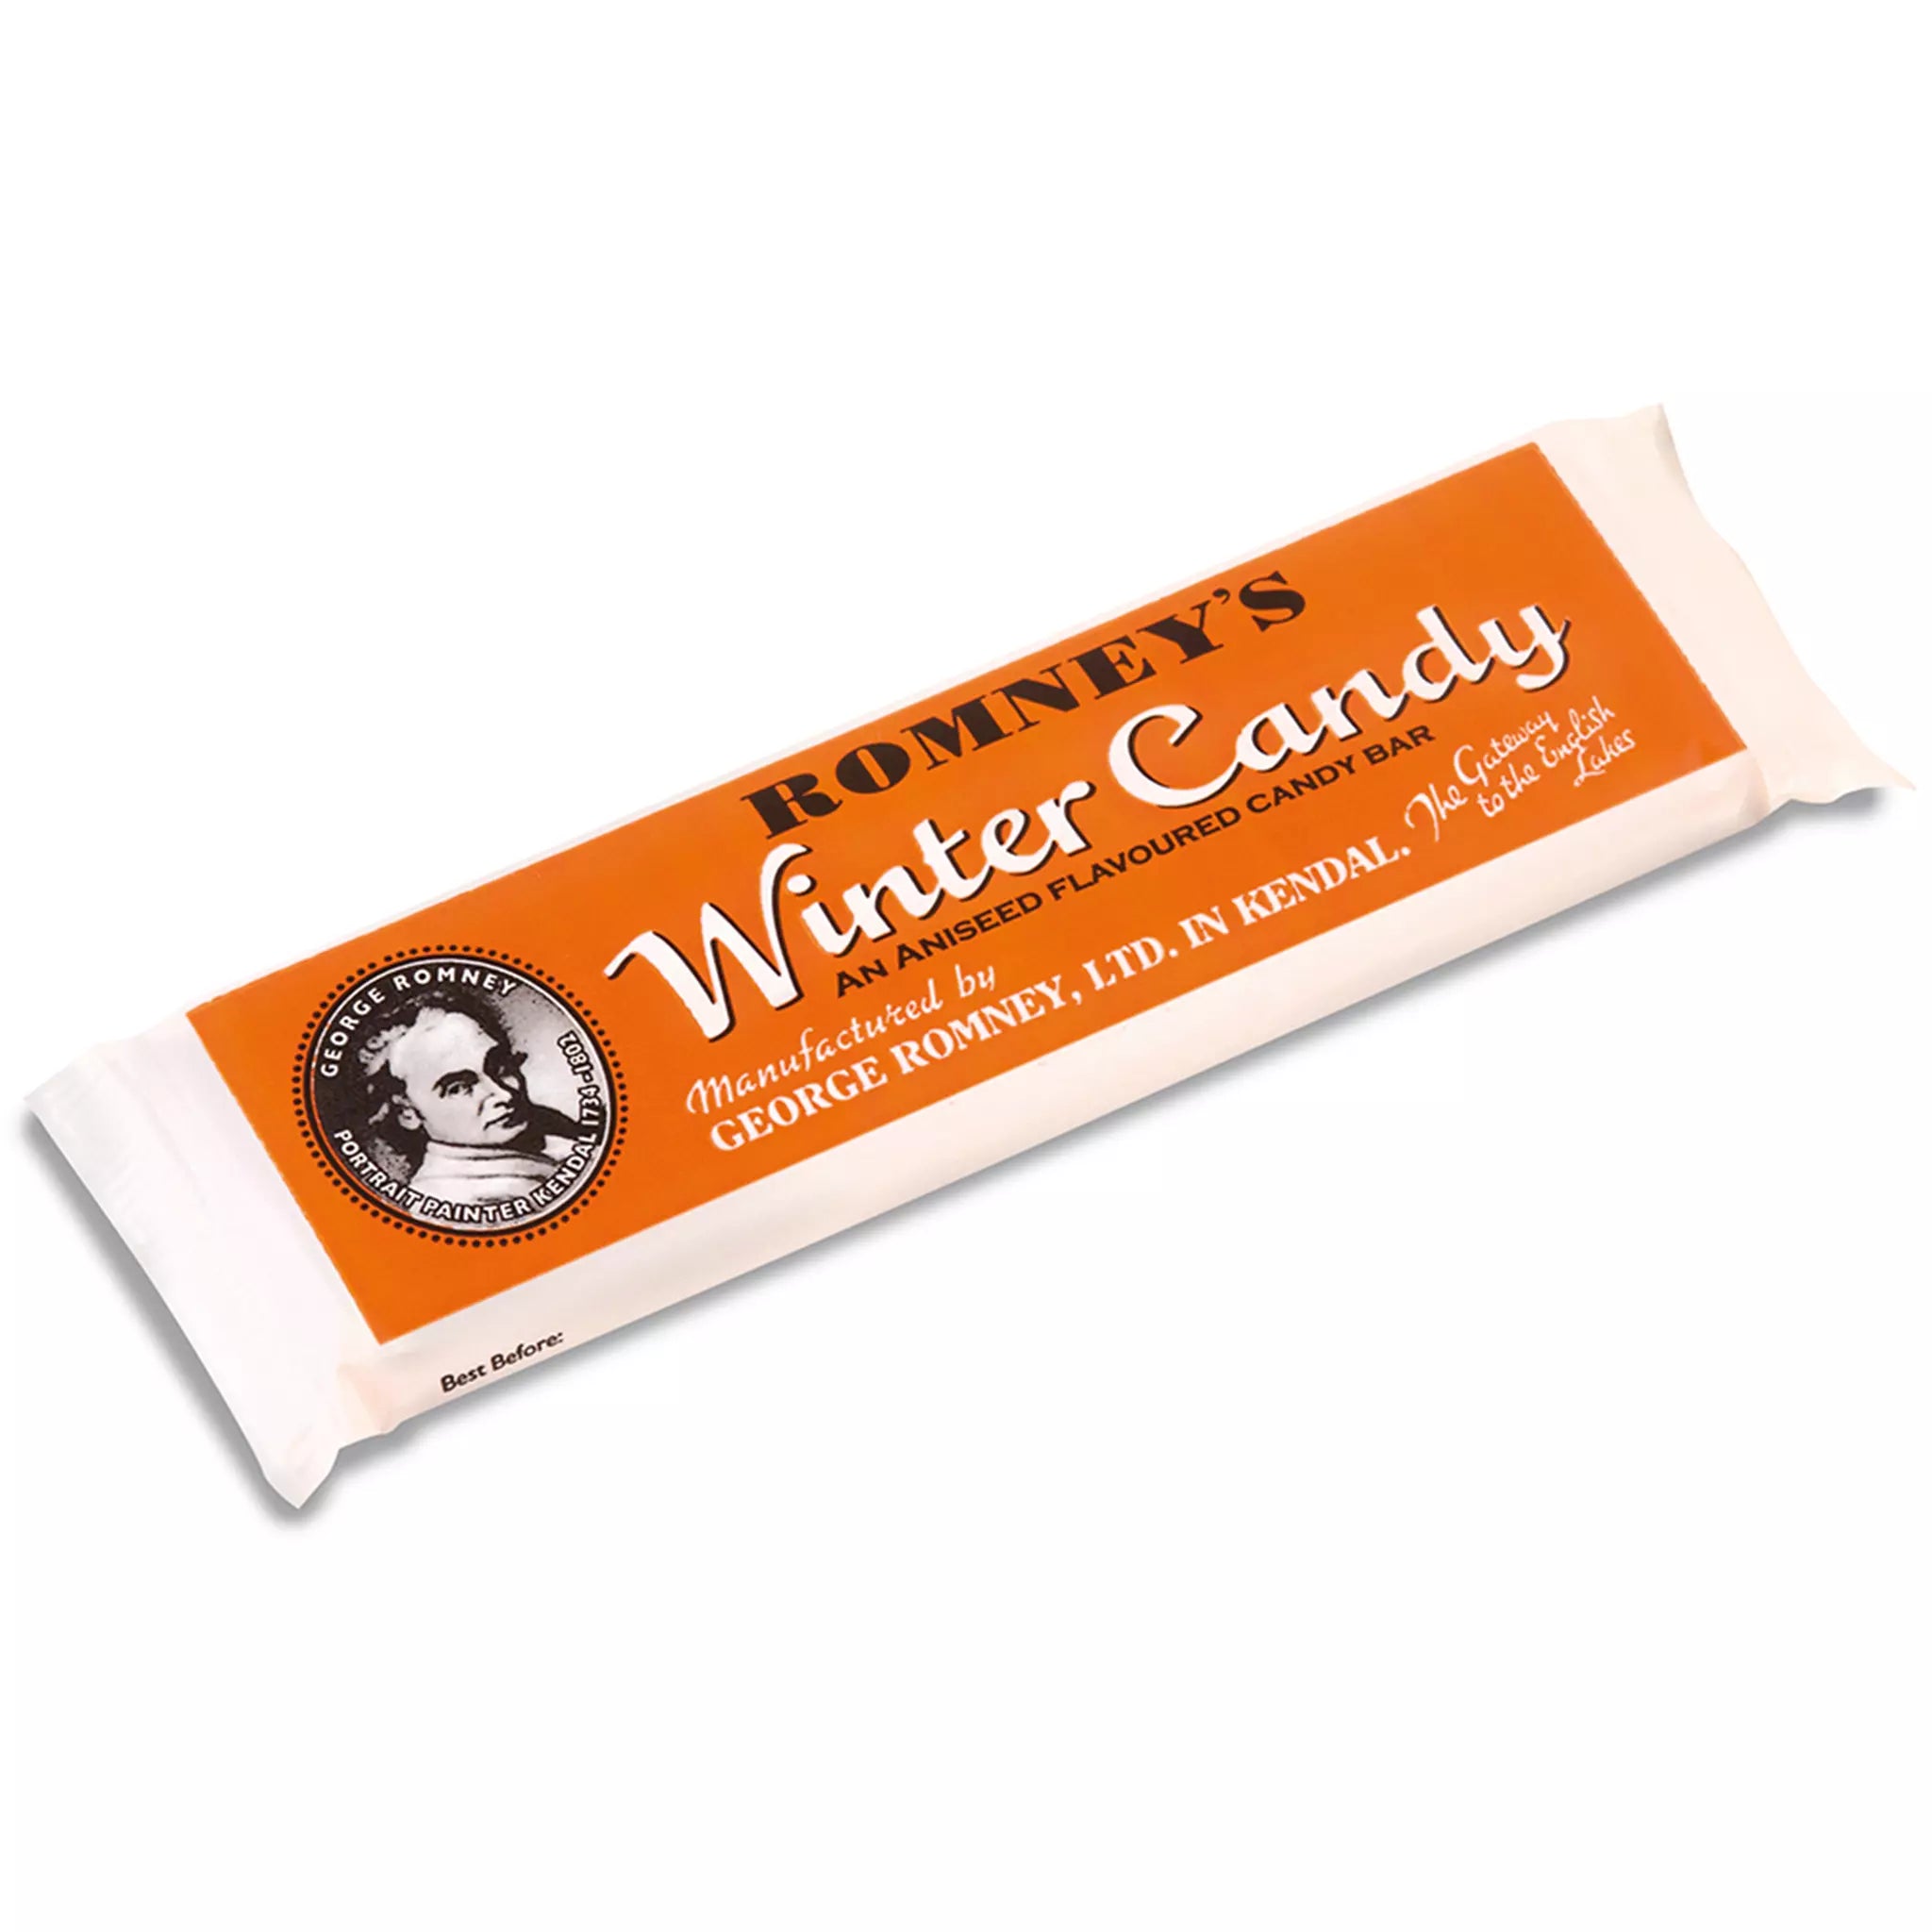 A bar of Winter Candy confectionery that is wrapped in an orange and white wrapper. The wrapper features the Romney's logo and the words 'Winter Candy' in white.